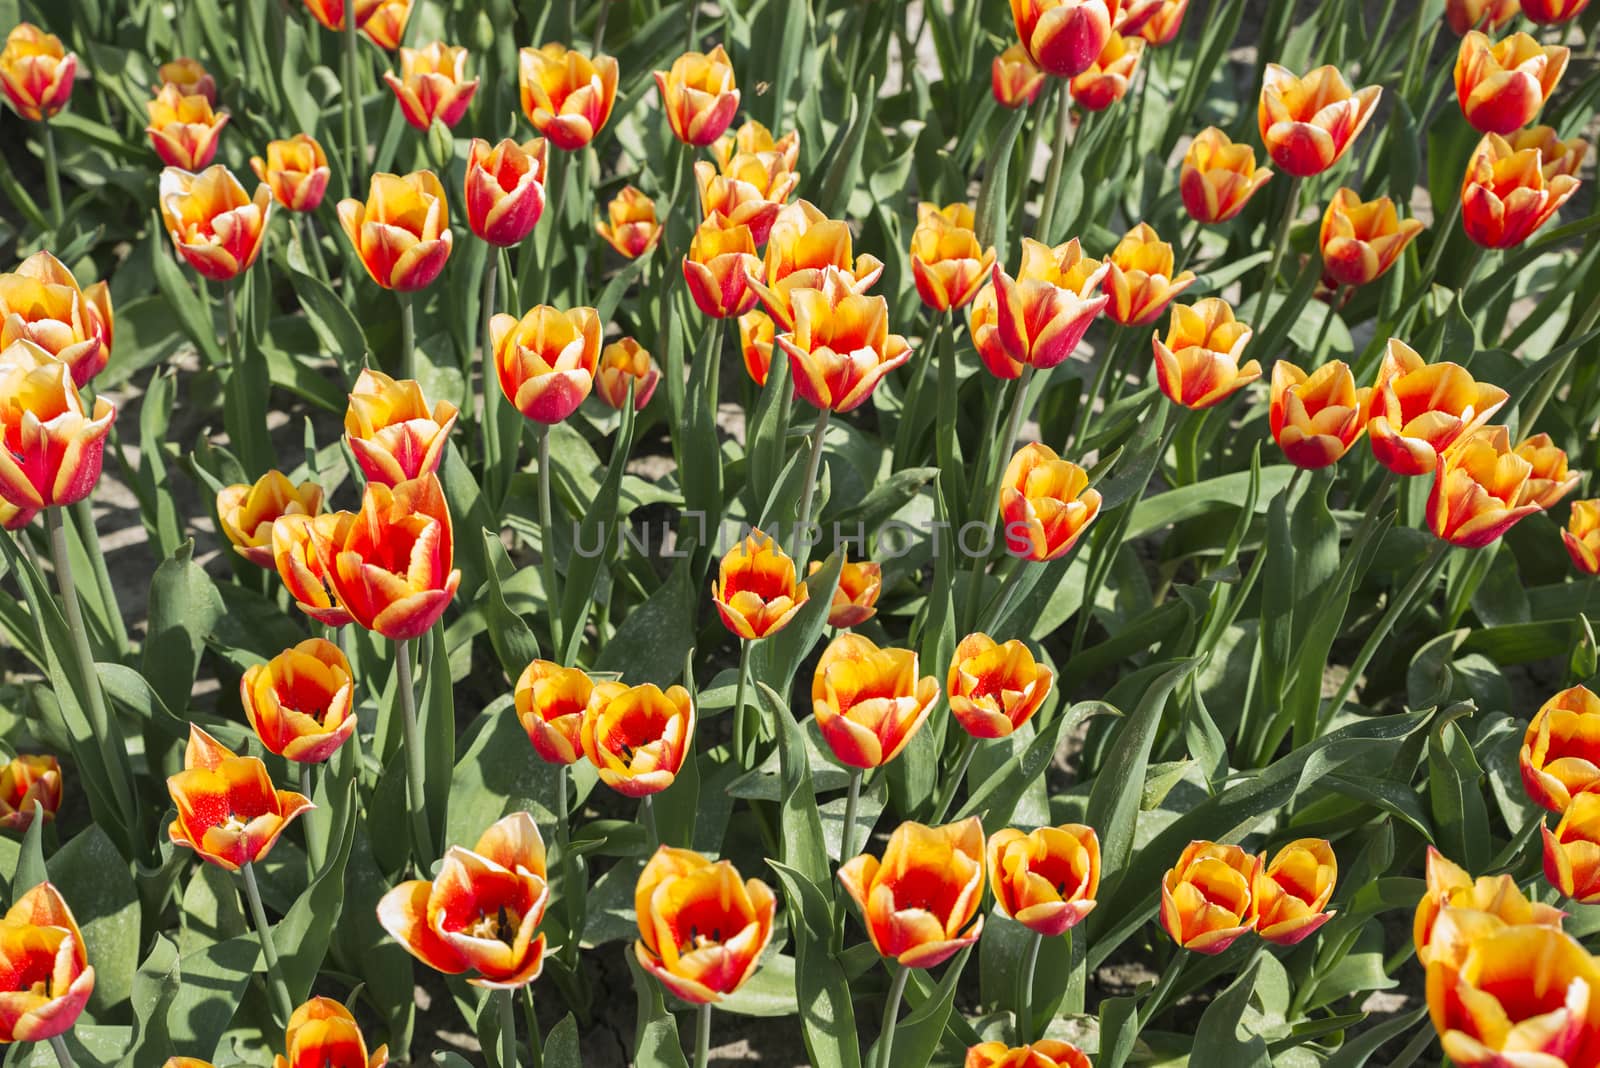 filed of red and yellow tluip flowers in holland where the flowers are famous and popular for export